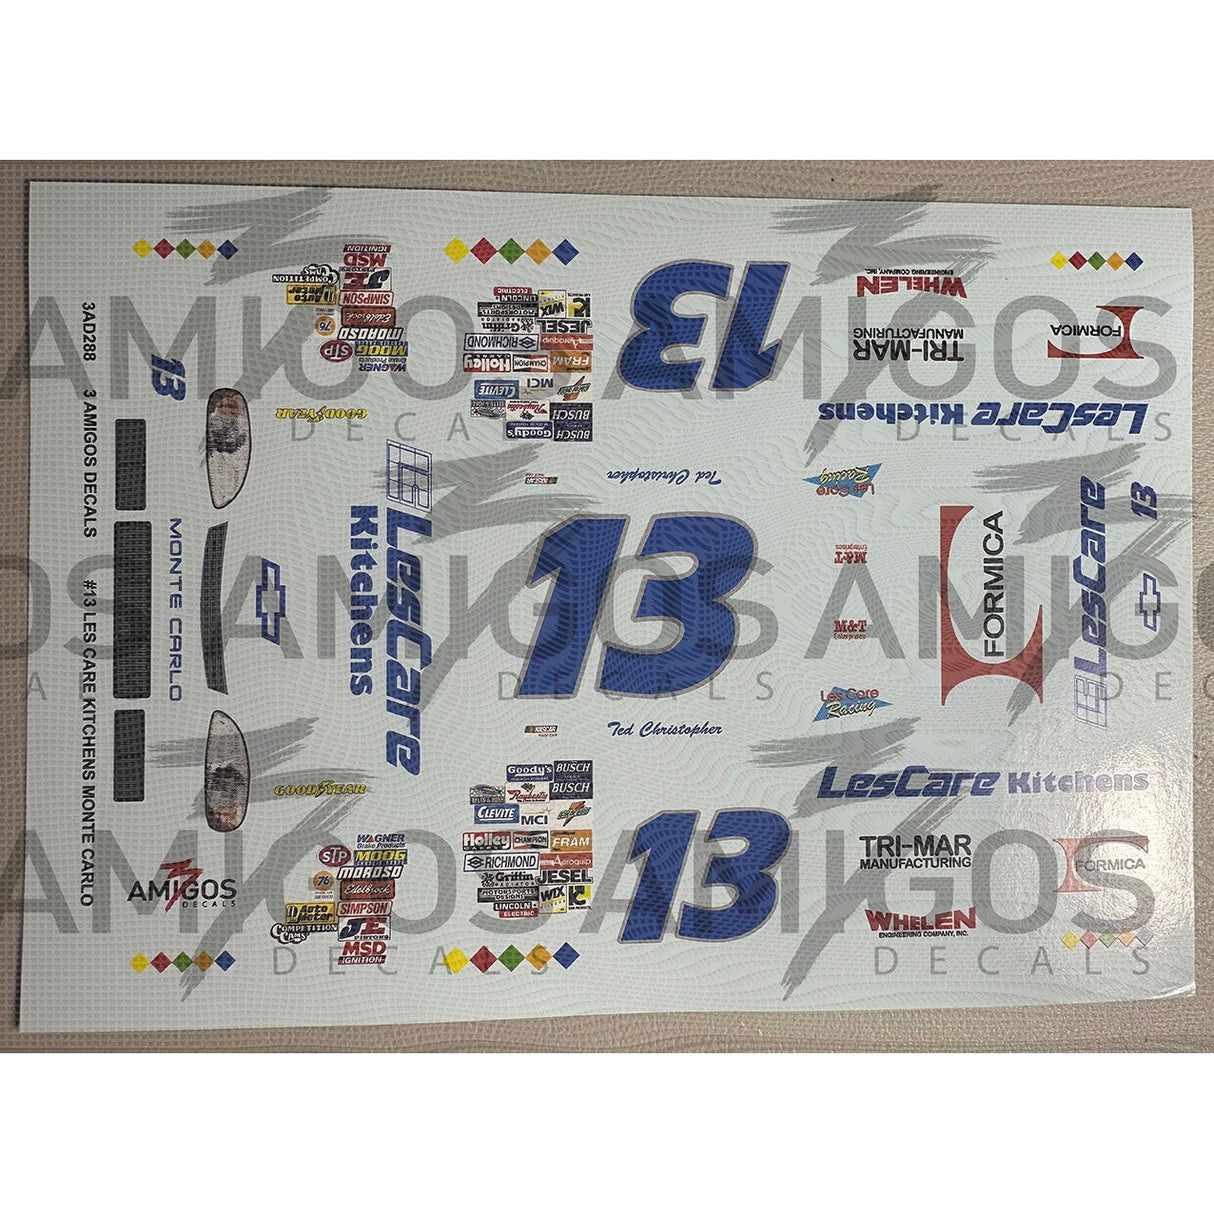 3 Amigos Decals #13 LES CARE KITCHENS MONTE CARLO Decal Set 1:24